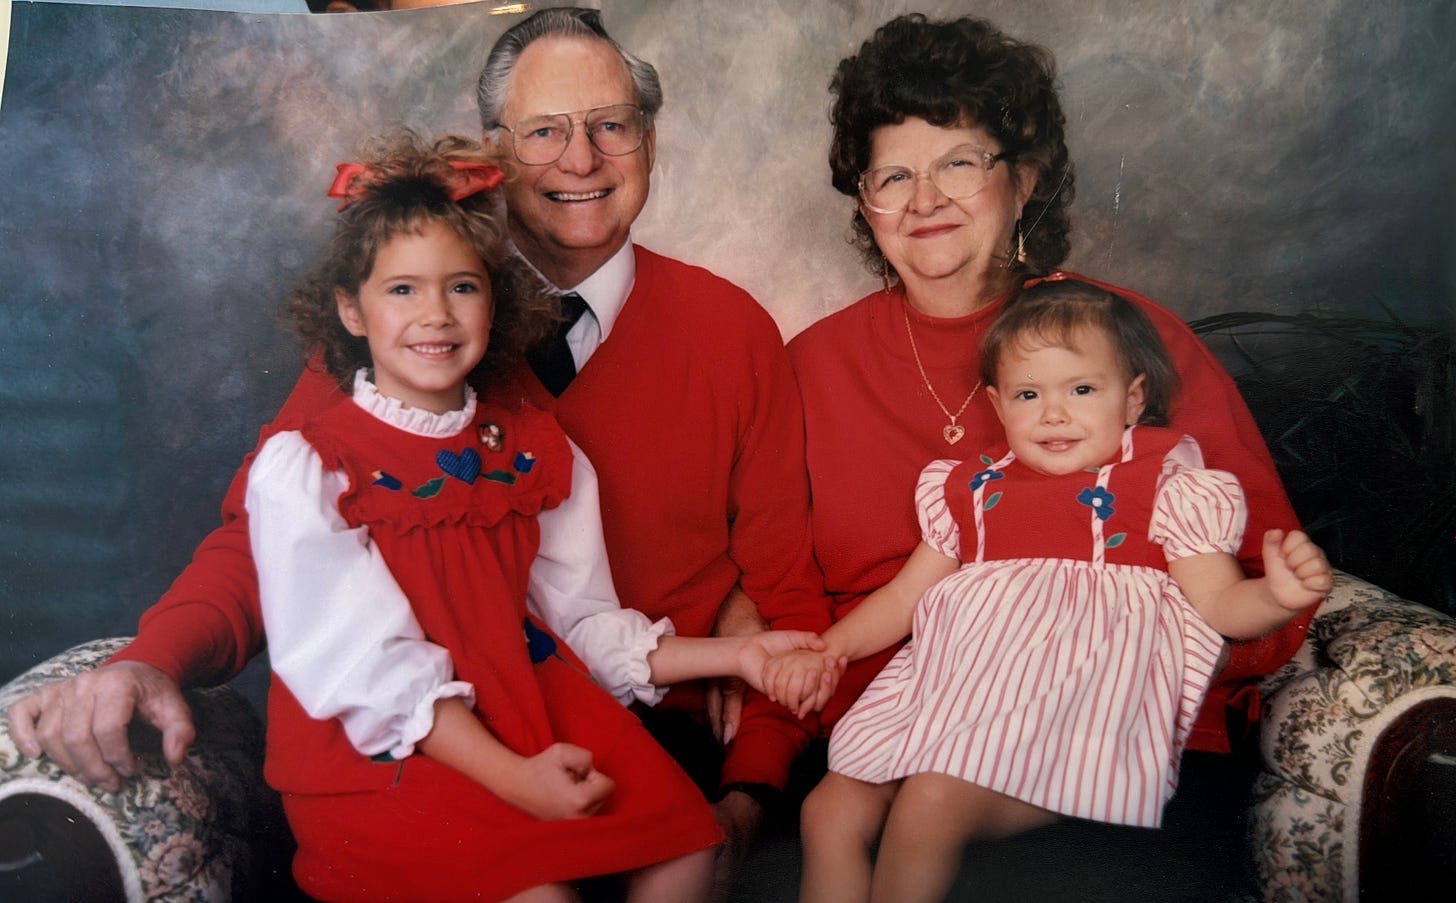 A 6 year old and two year old girl sit on their grandparents' laps, holding hands. Everyone is wearing red and smiling.